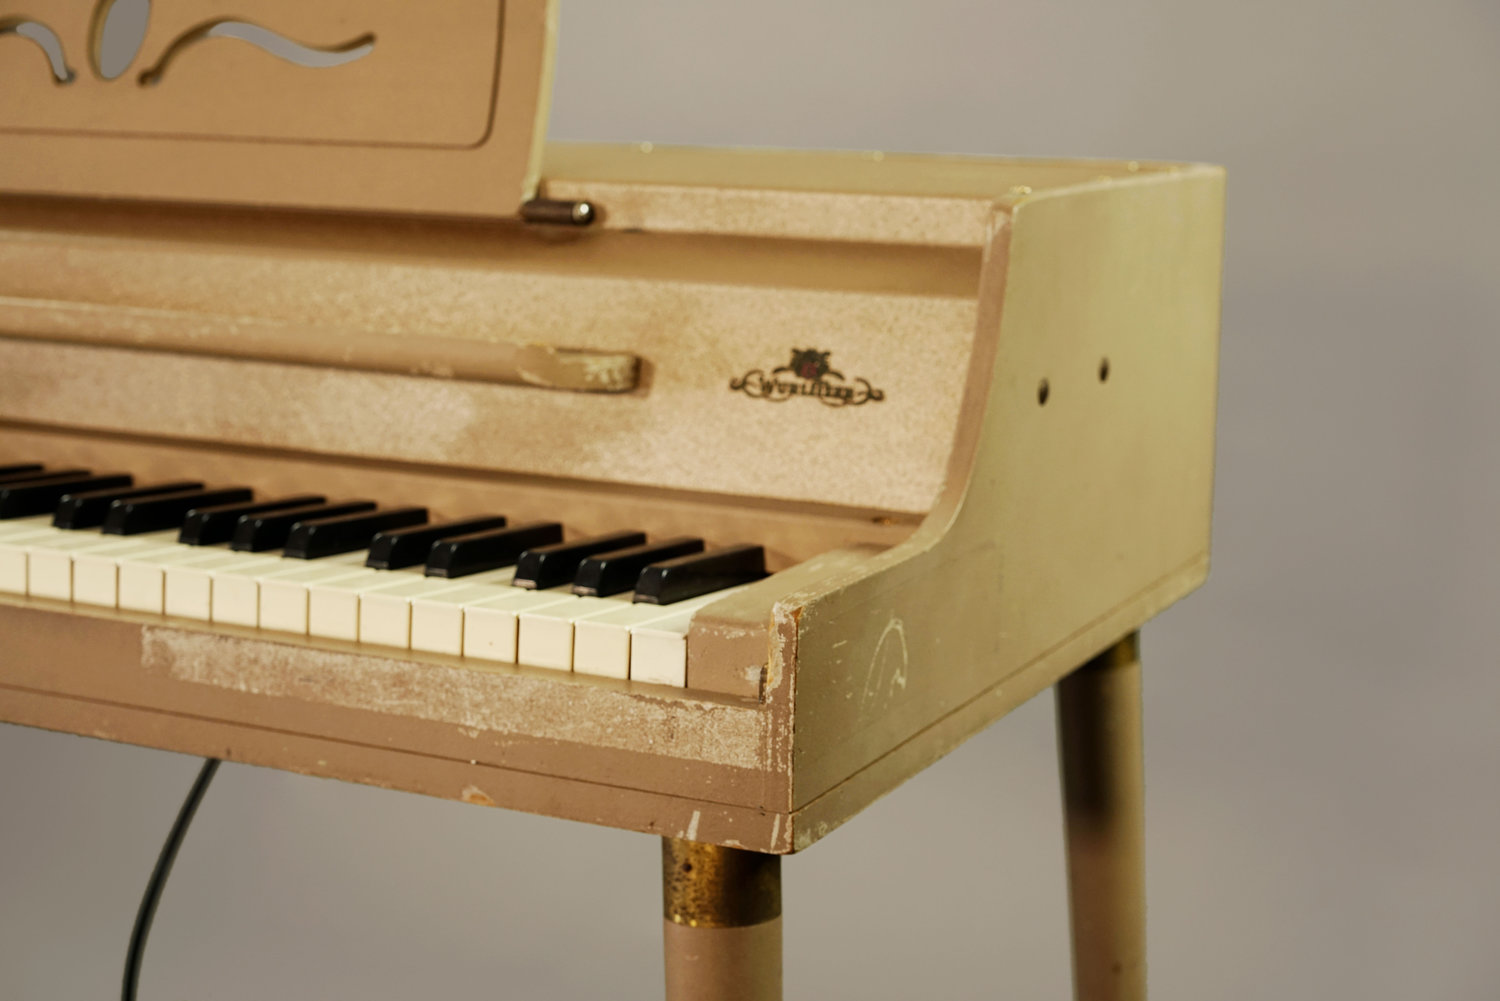 How Does a Wurlitzer Electronic Piano Work?